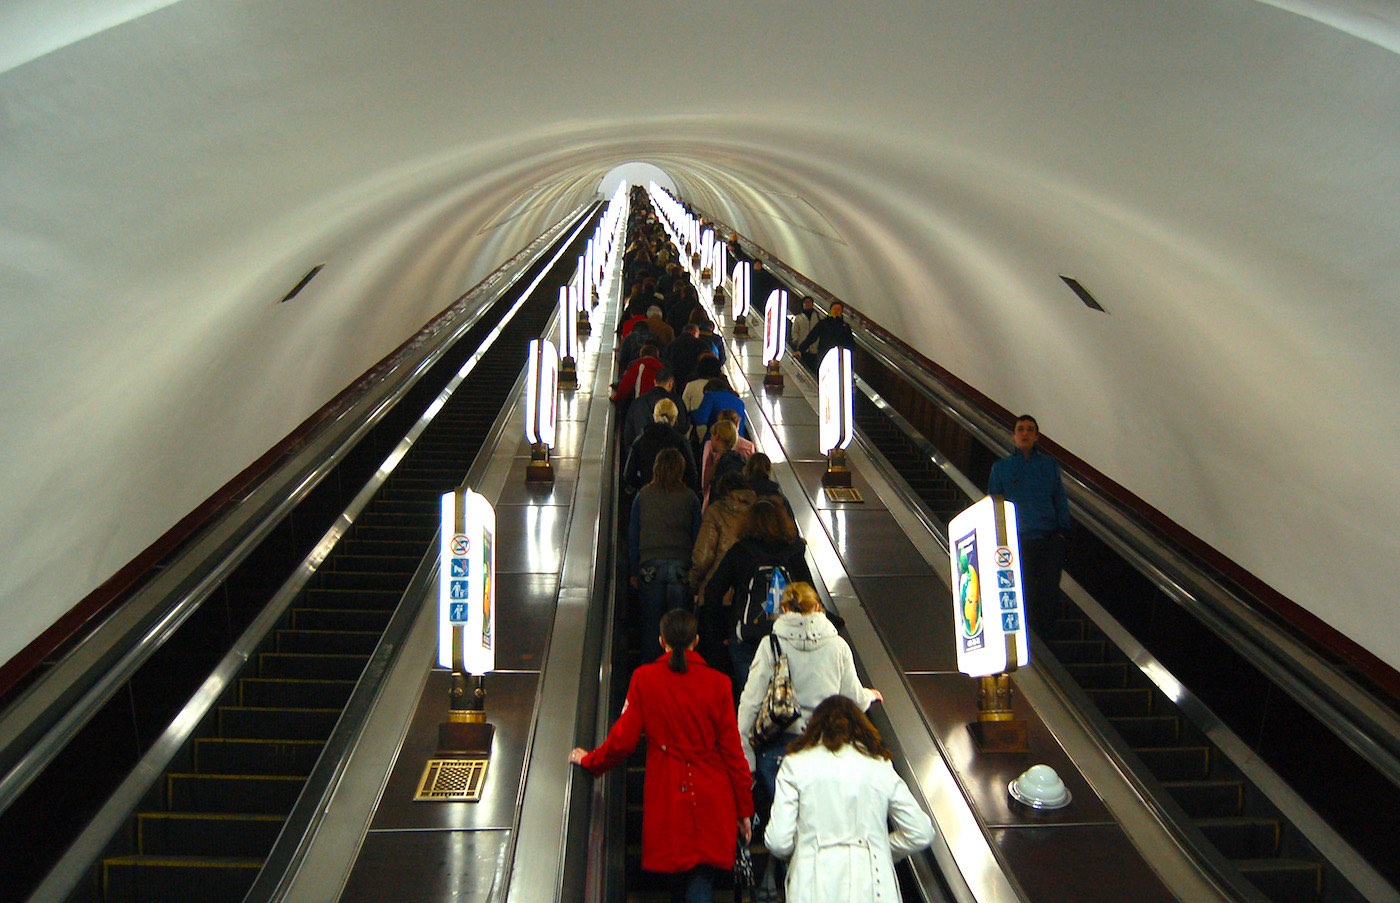 The Deepest Metro Stations In The World - CITI I/O